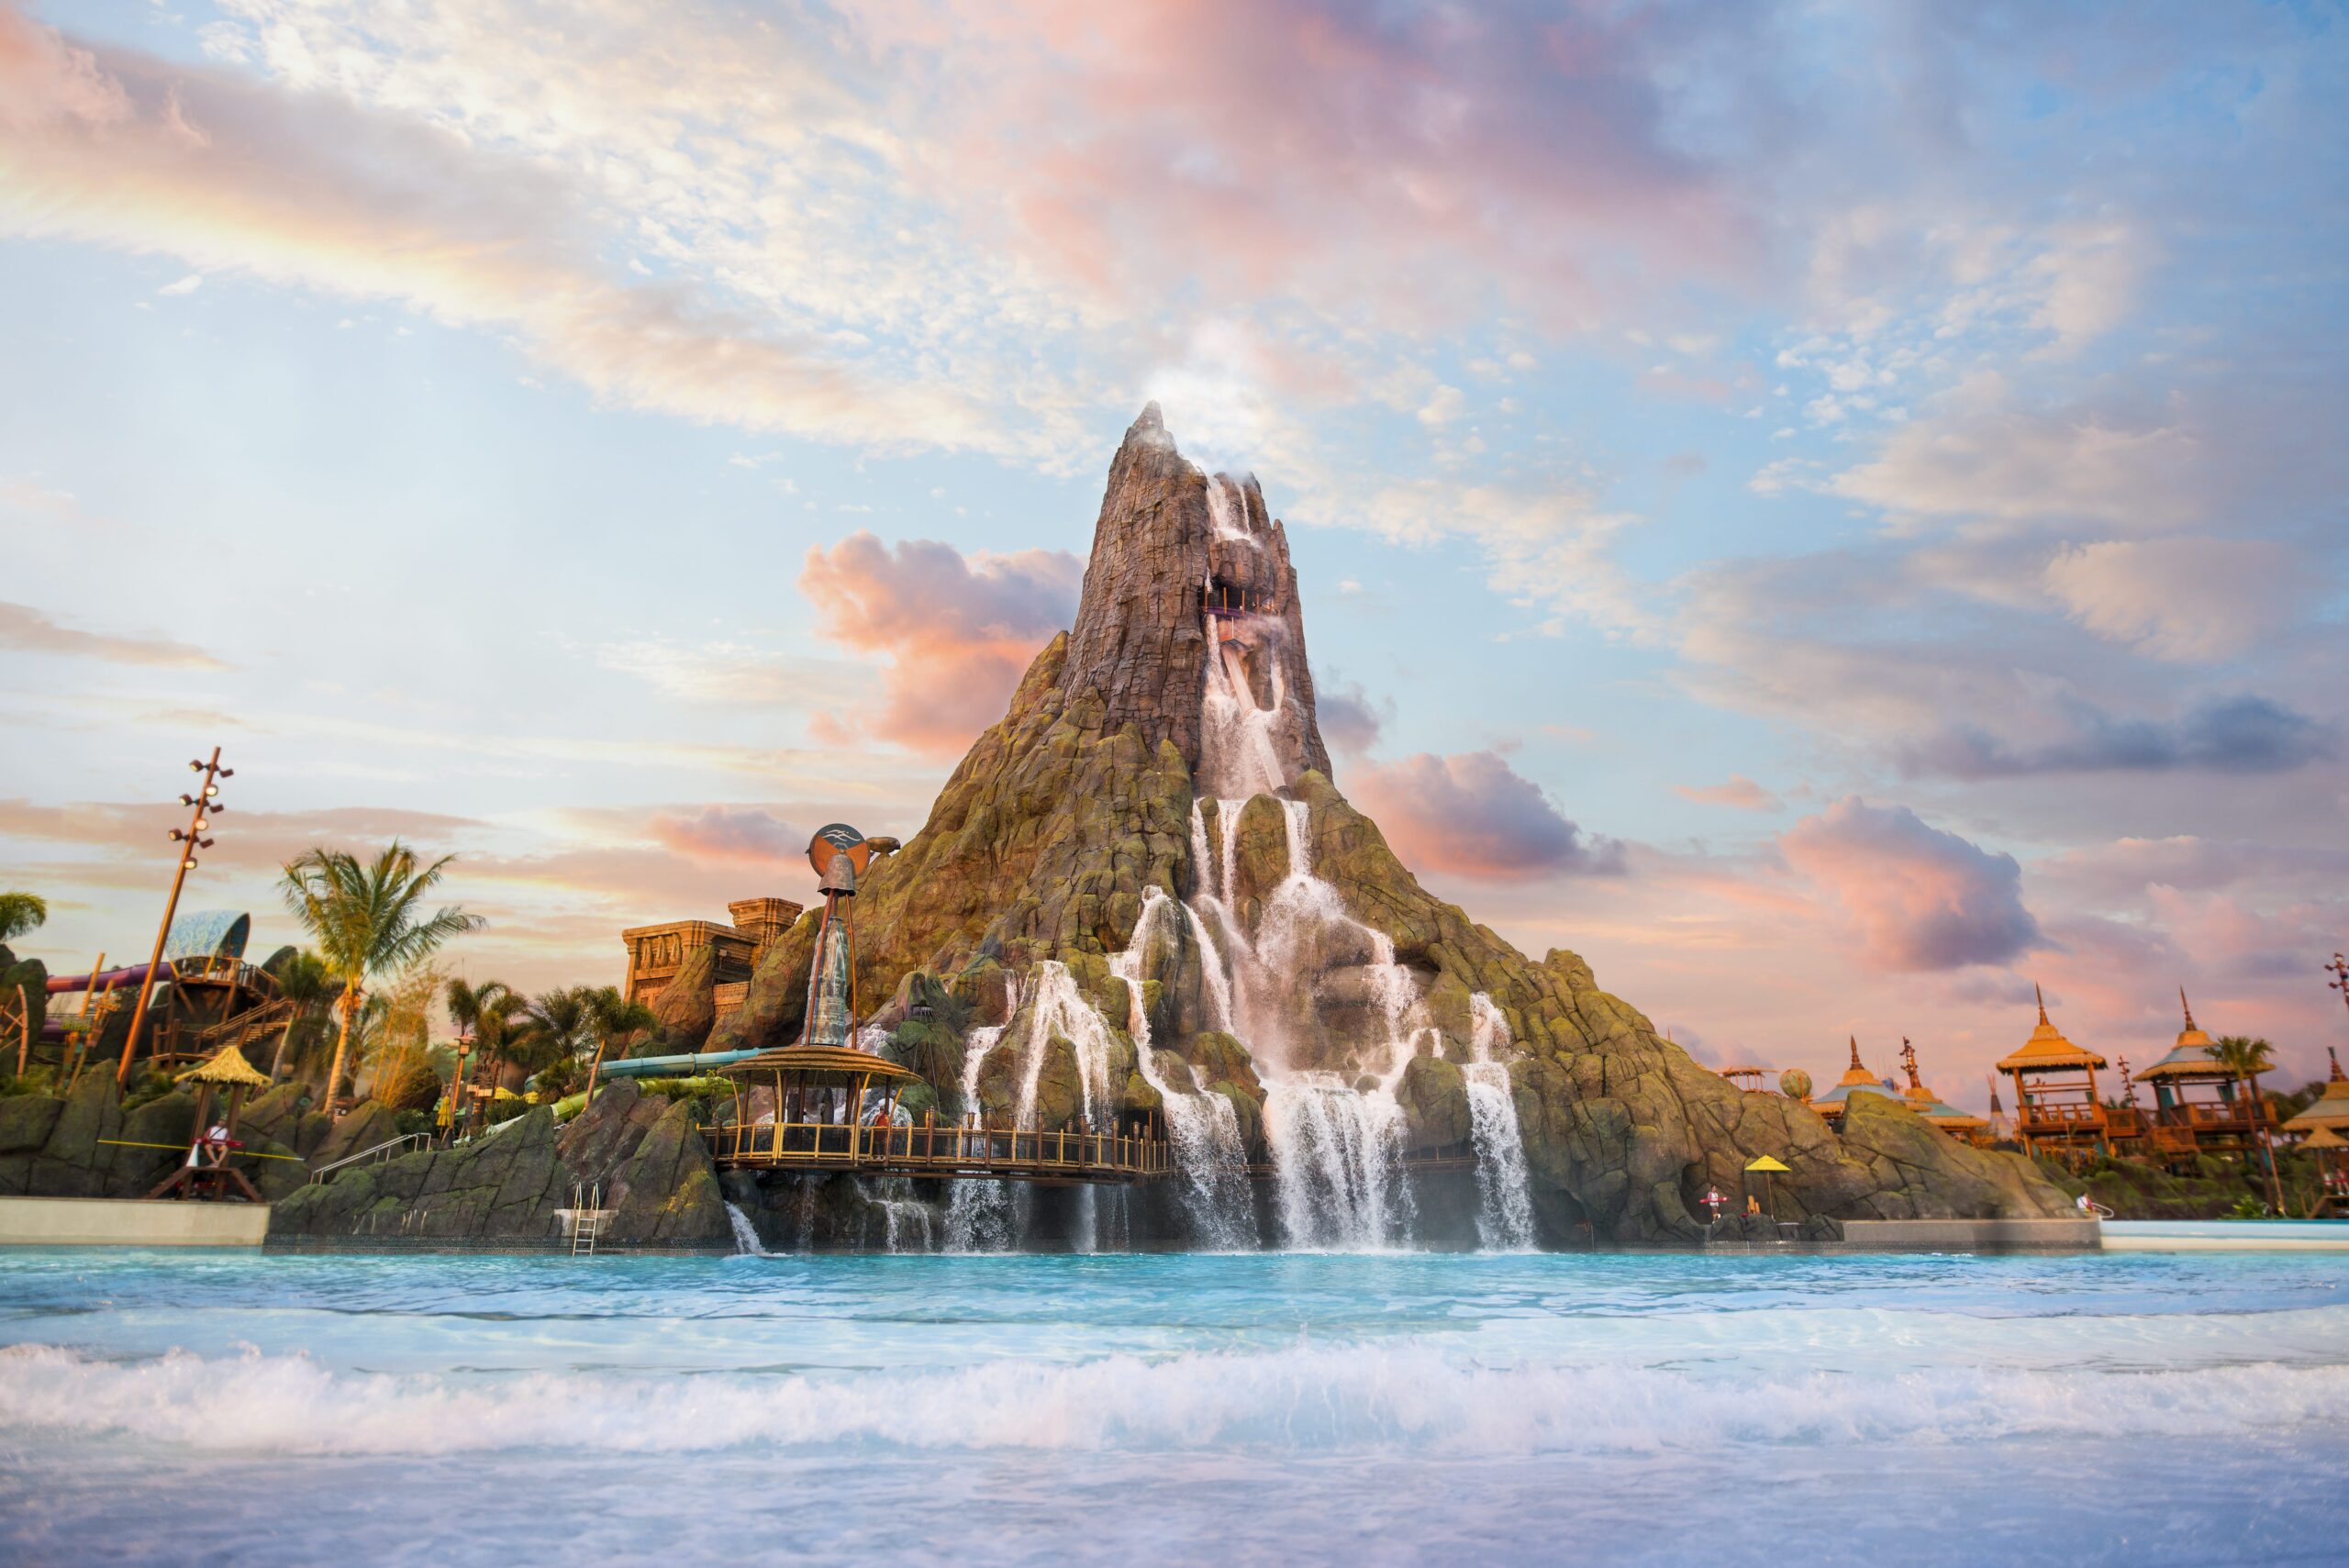 a wideshot of the titular volcano centerpiece at volcano bay water theme park